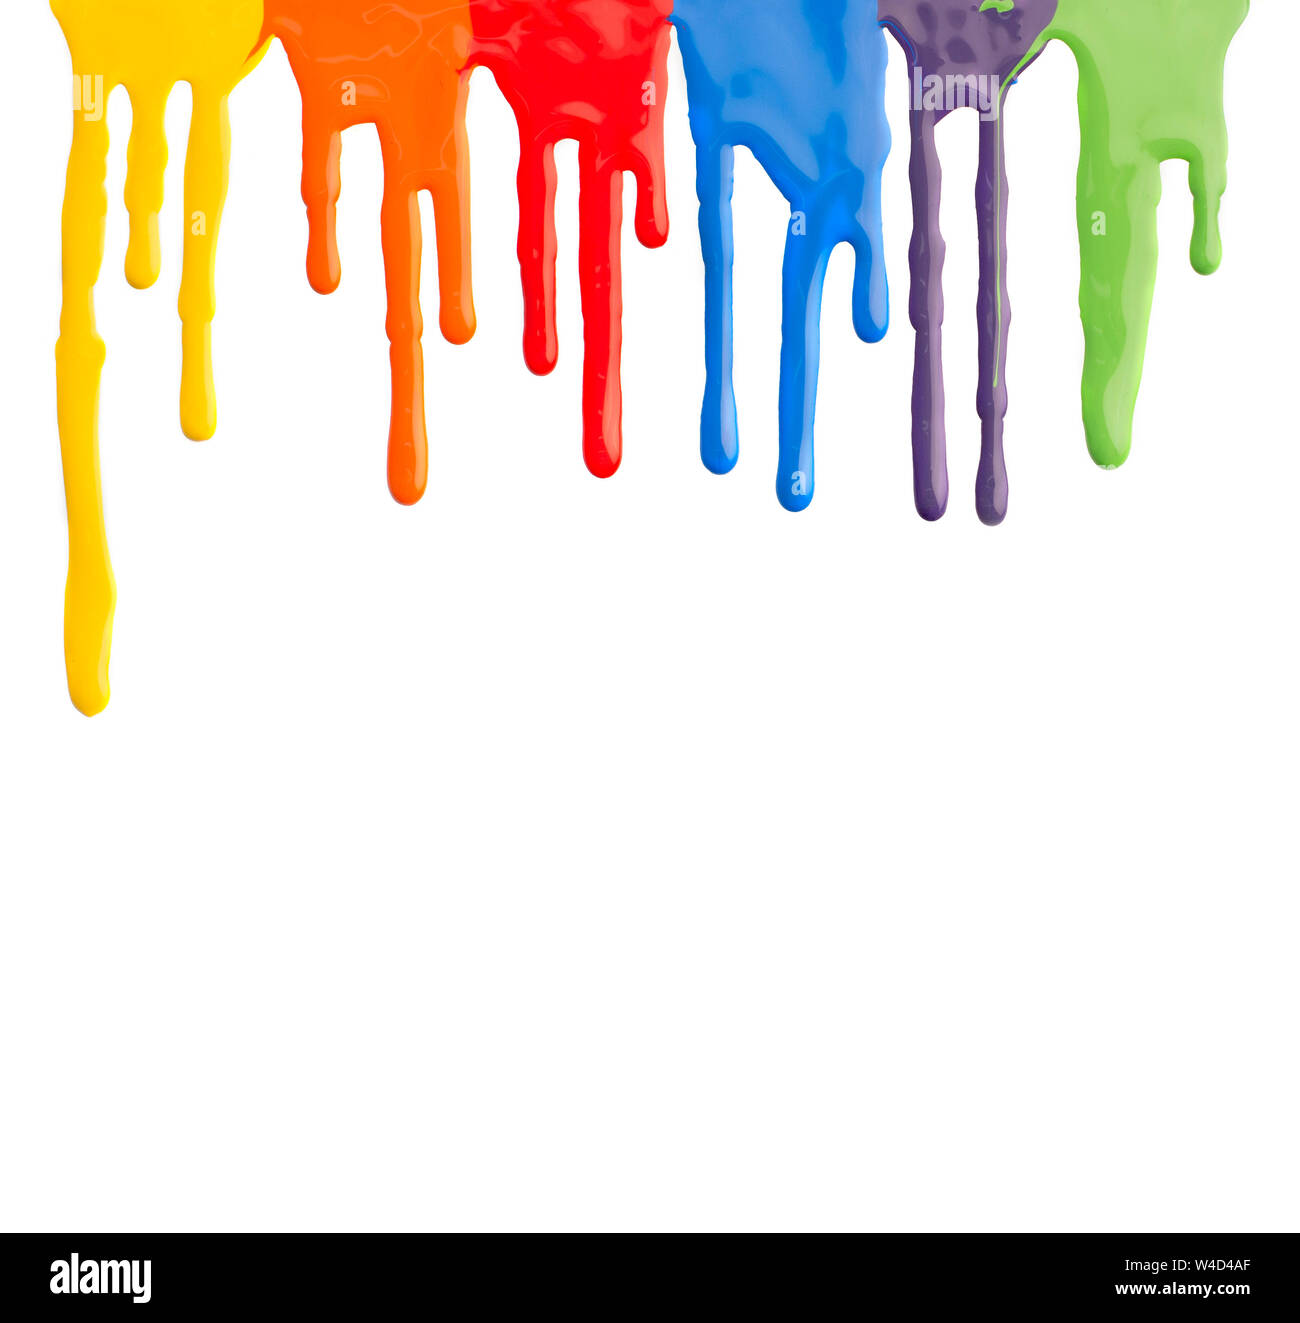 Liquid motion of acrylic colors flowing down on white Stock Photo